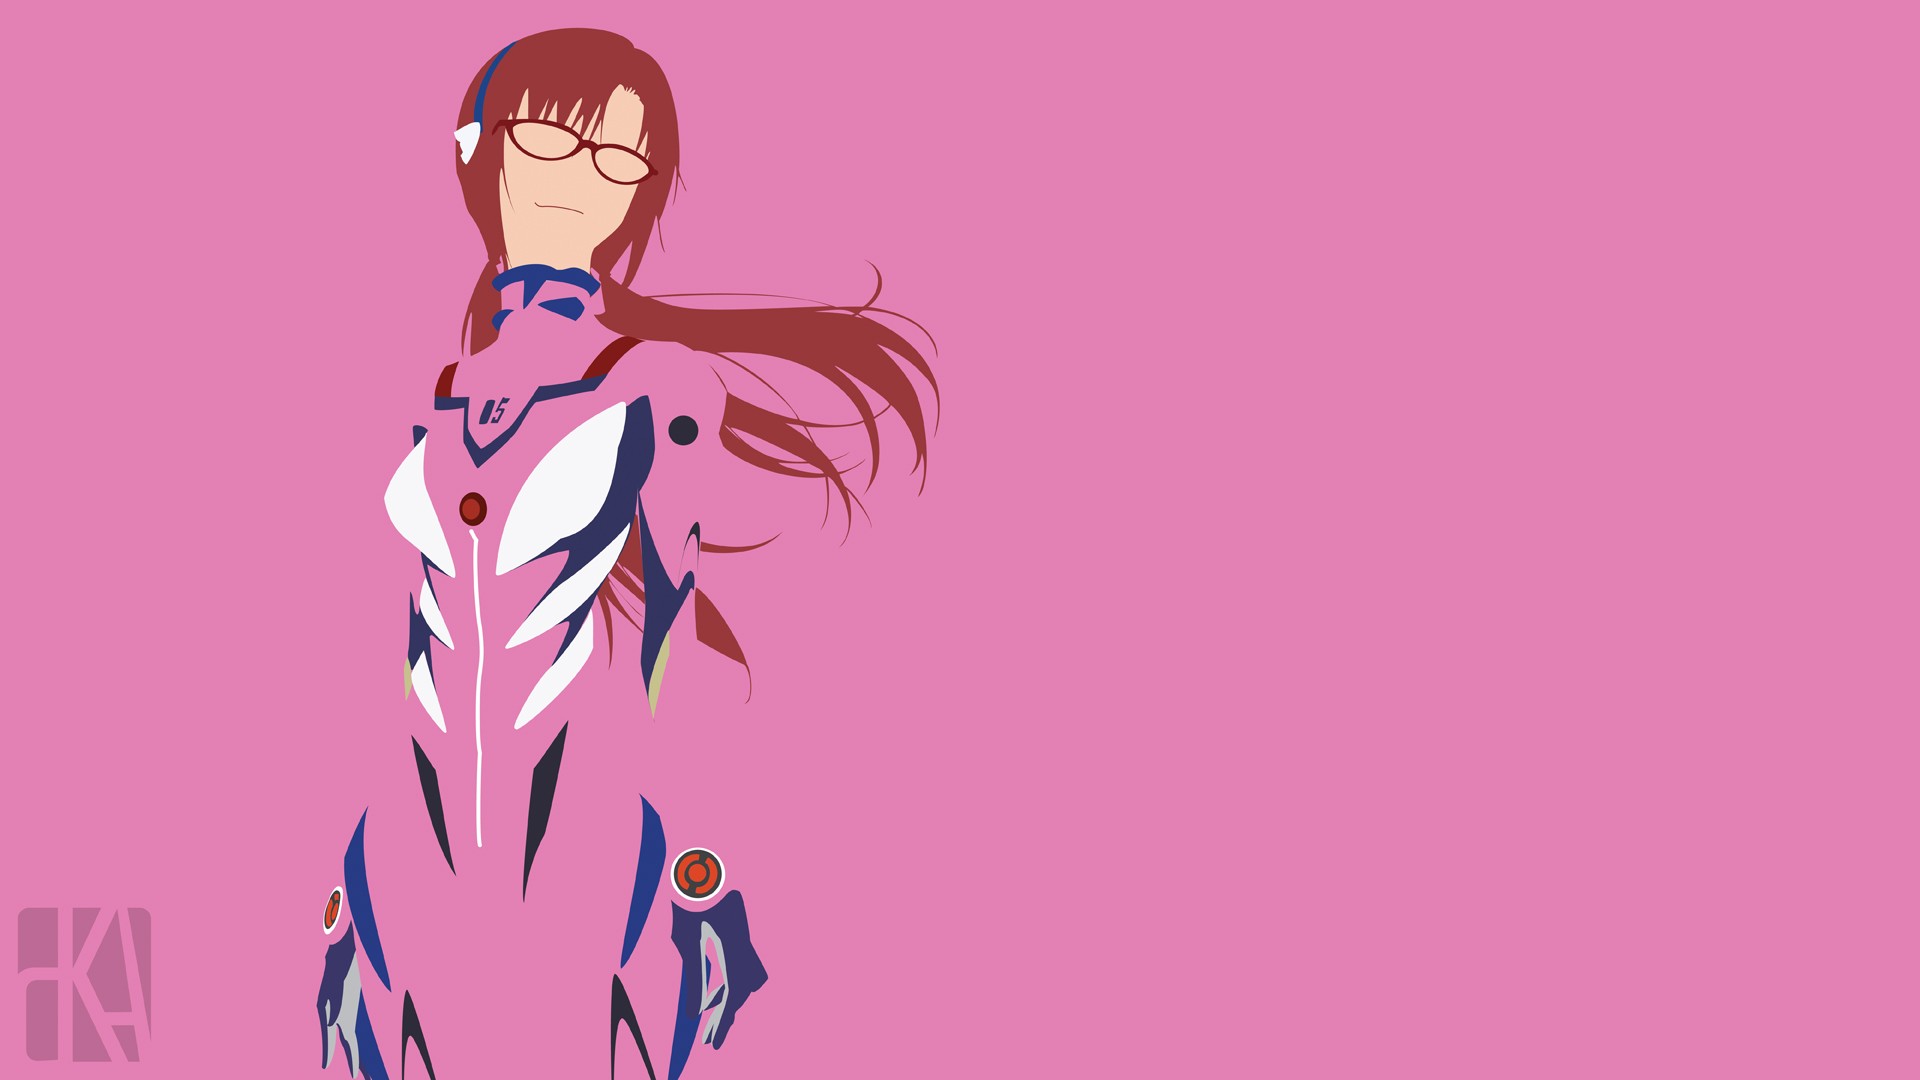 Anime 1920x1080 anime Neon Genesis Evangelion Evangelion: 3.0 You Can (Not) Redo Makinami Mari Illustrious anime girls pink background simple background minimalism women with glasses redhead long hair numbers